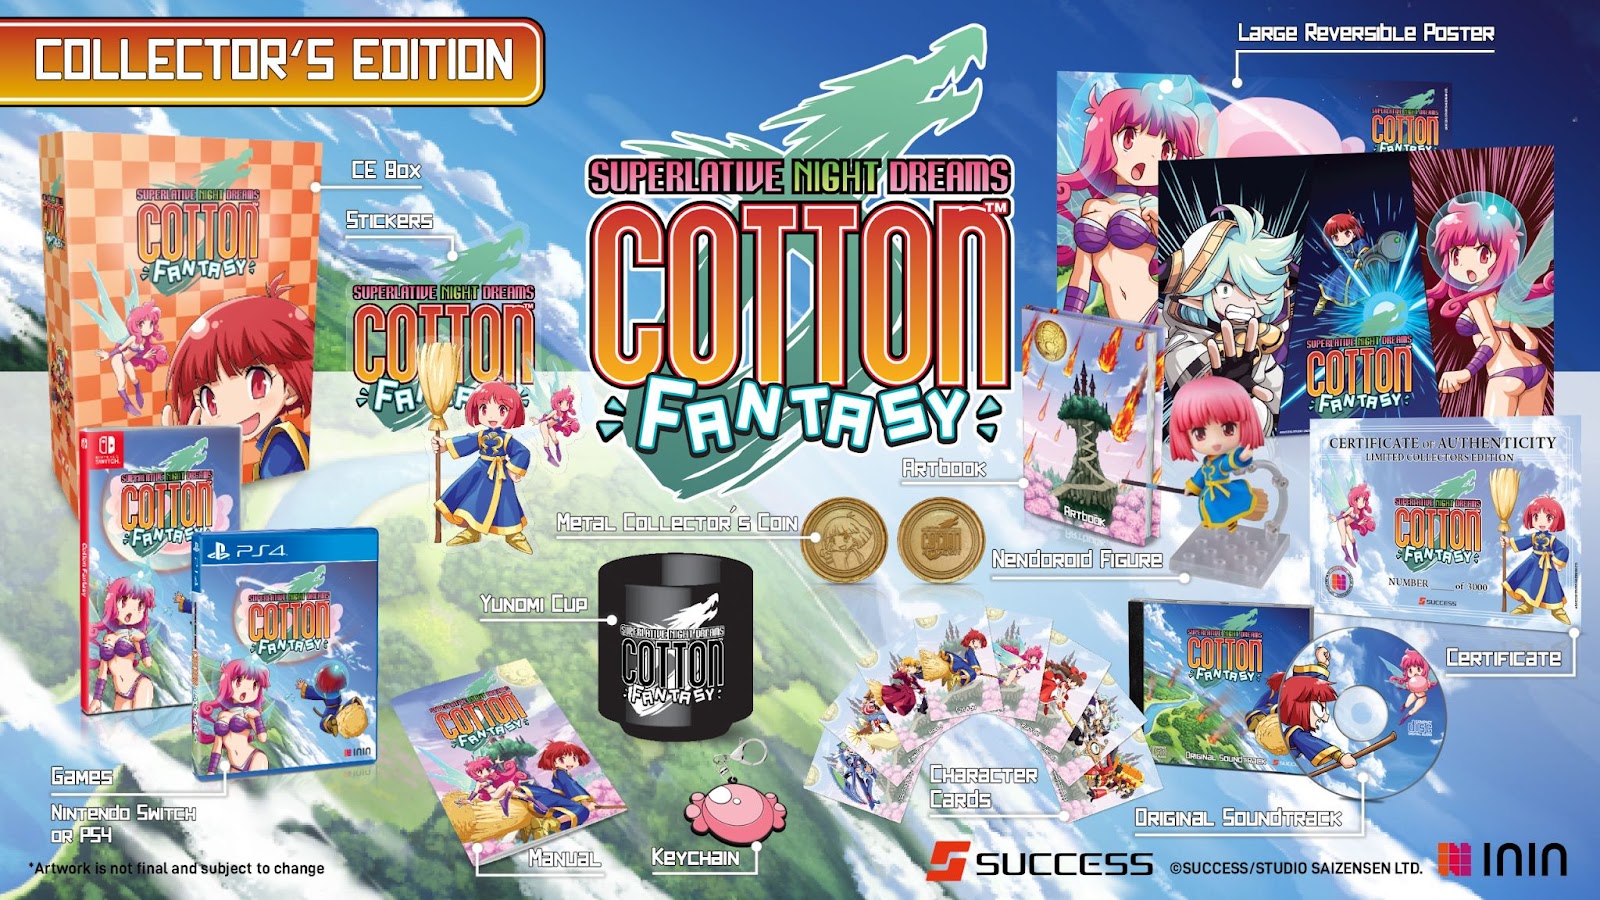 Collector's edition contents